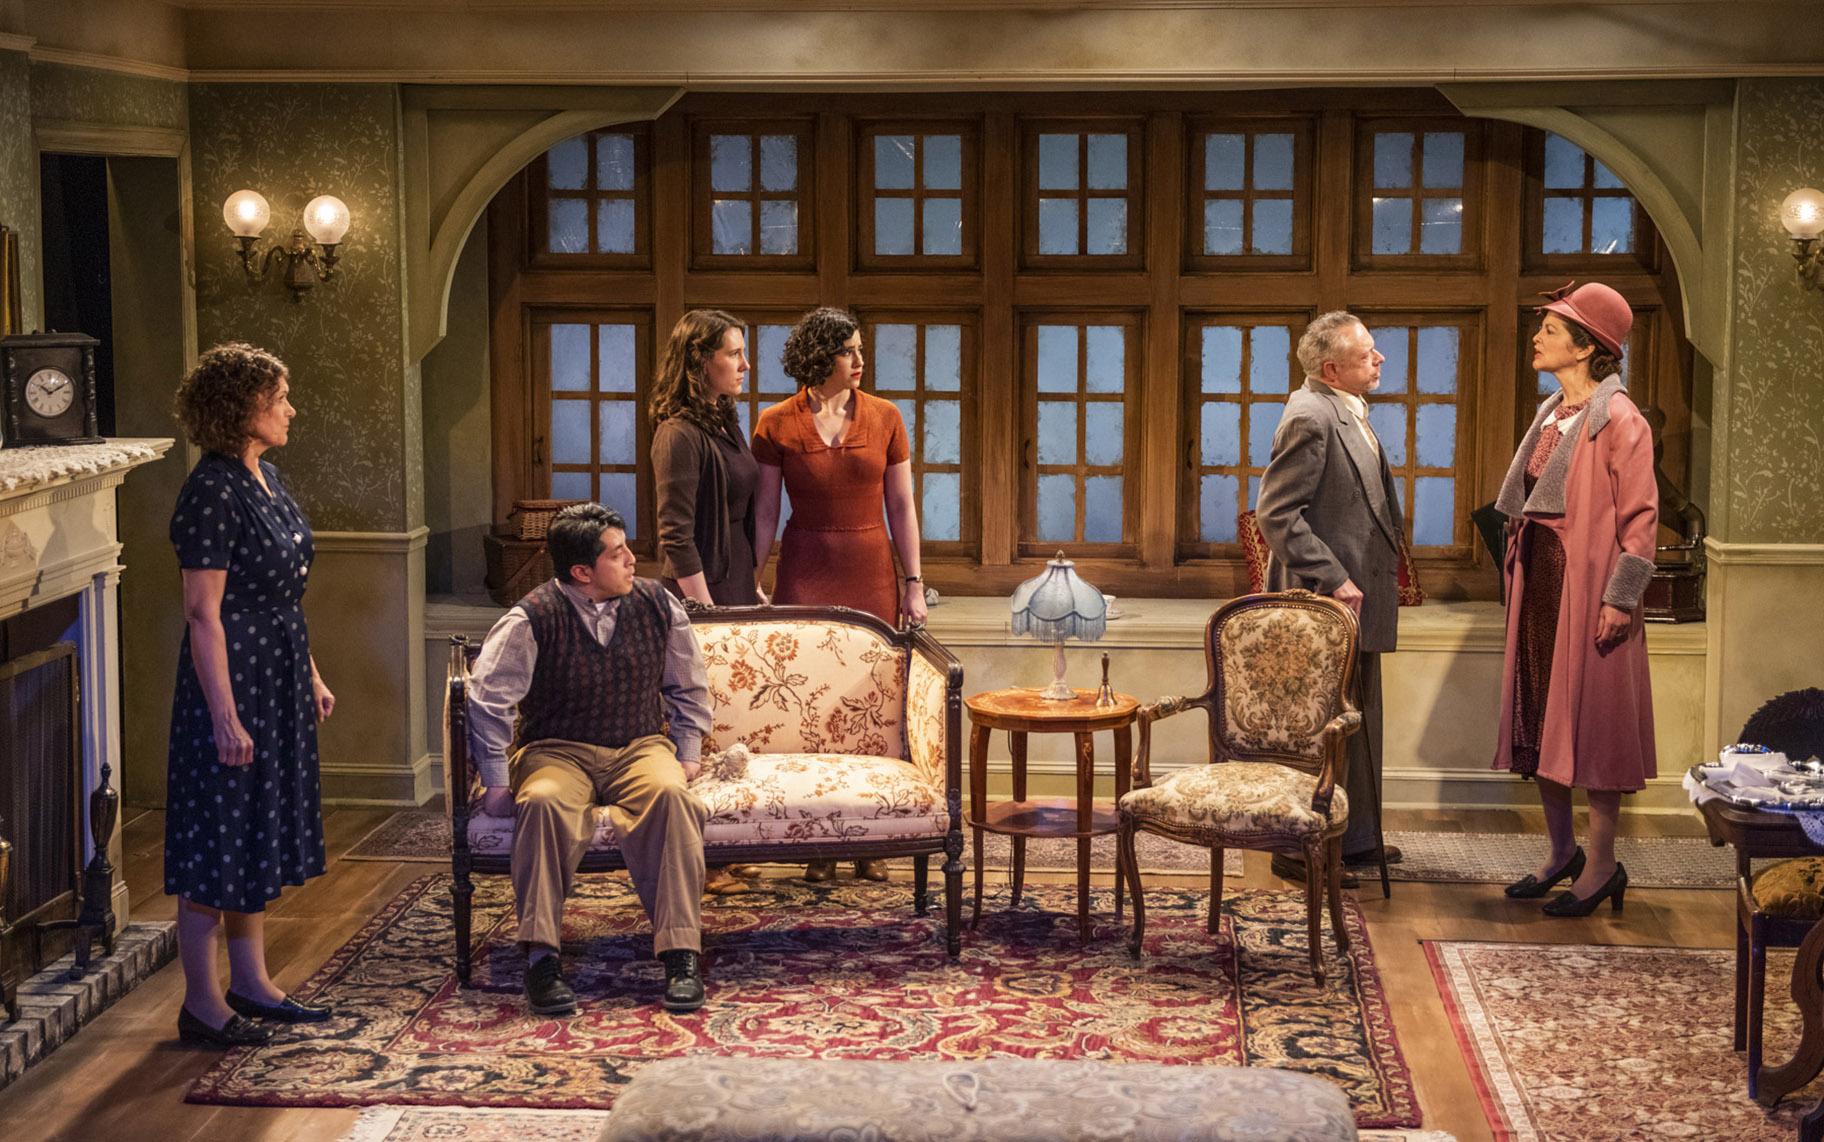 From left: Lynda Shadrake, Israel Antonio, Ella Pennington, Krystal Ortiz, Tim Newell and Cindy Marker in Griffin Theatre Company’s production of “For Services Rendered.” (Photo by Michael Brosilow)